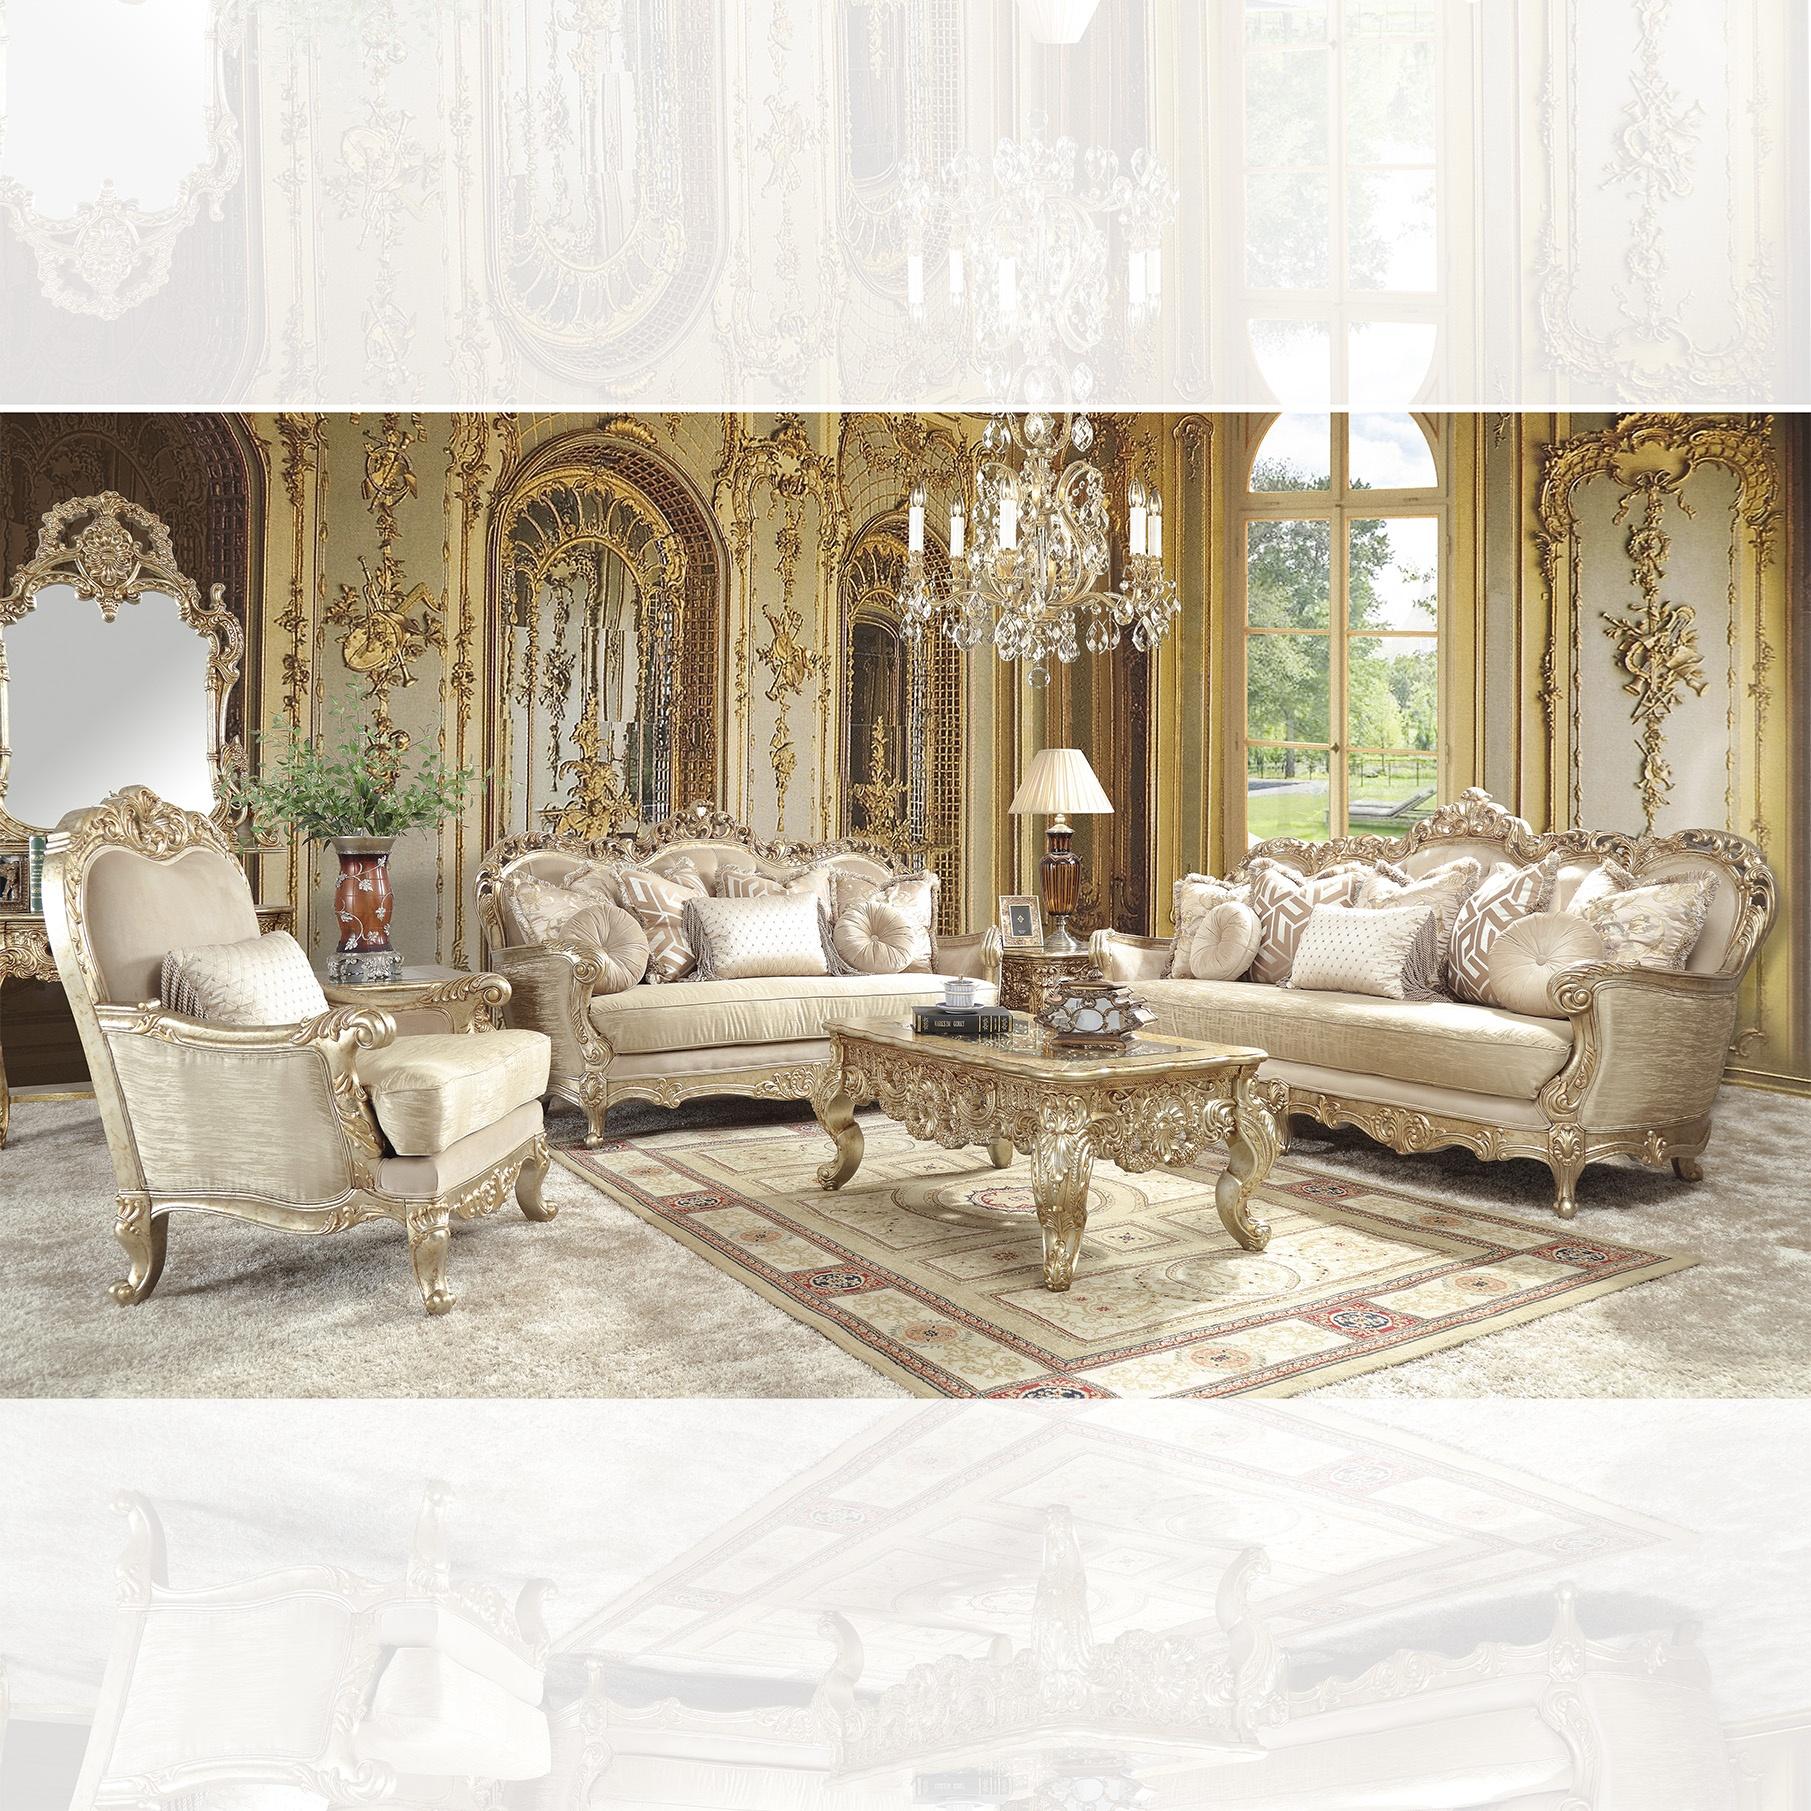 Traditional Sofa Set HD-8925 HD-8925 3PC in Gold Finish, Silver, Champagne Fabric